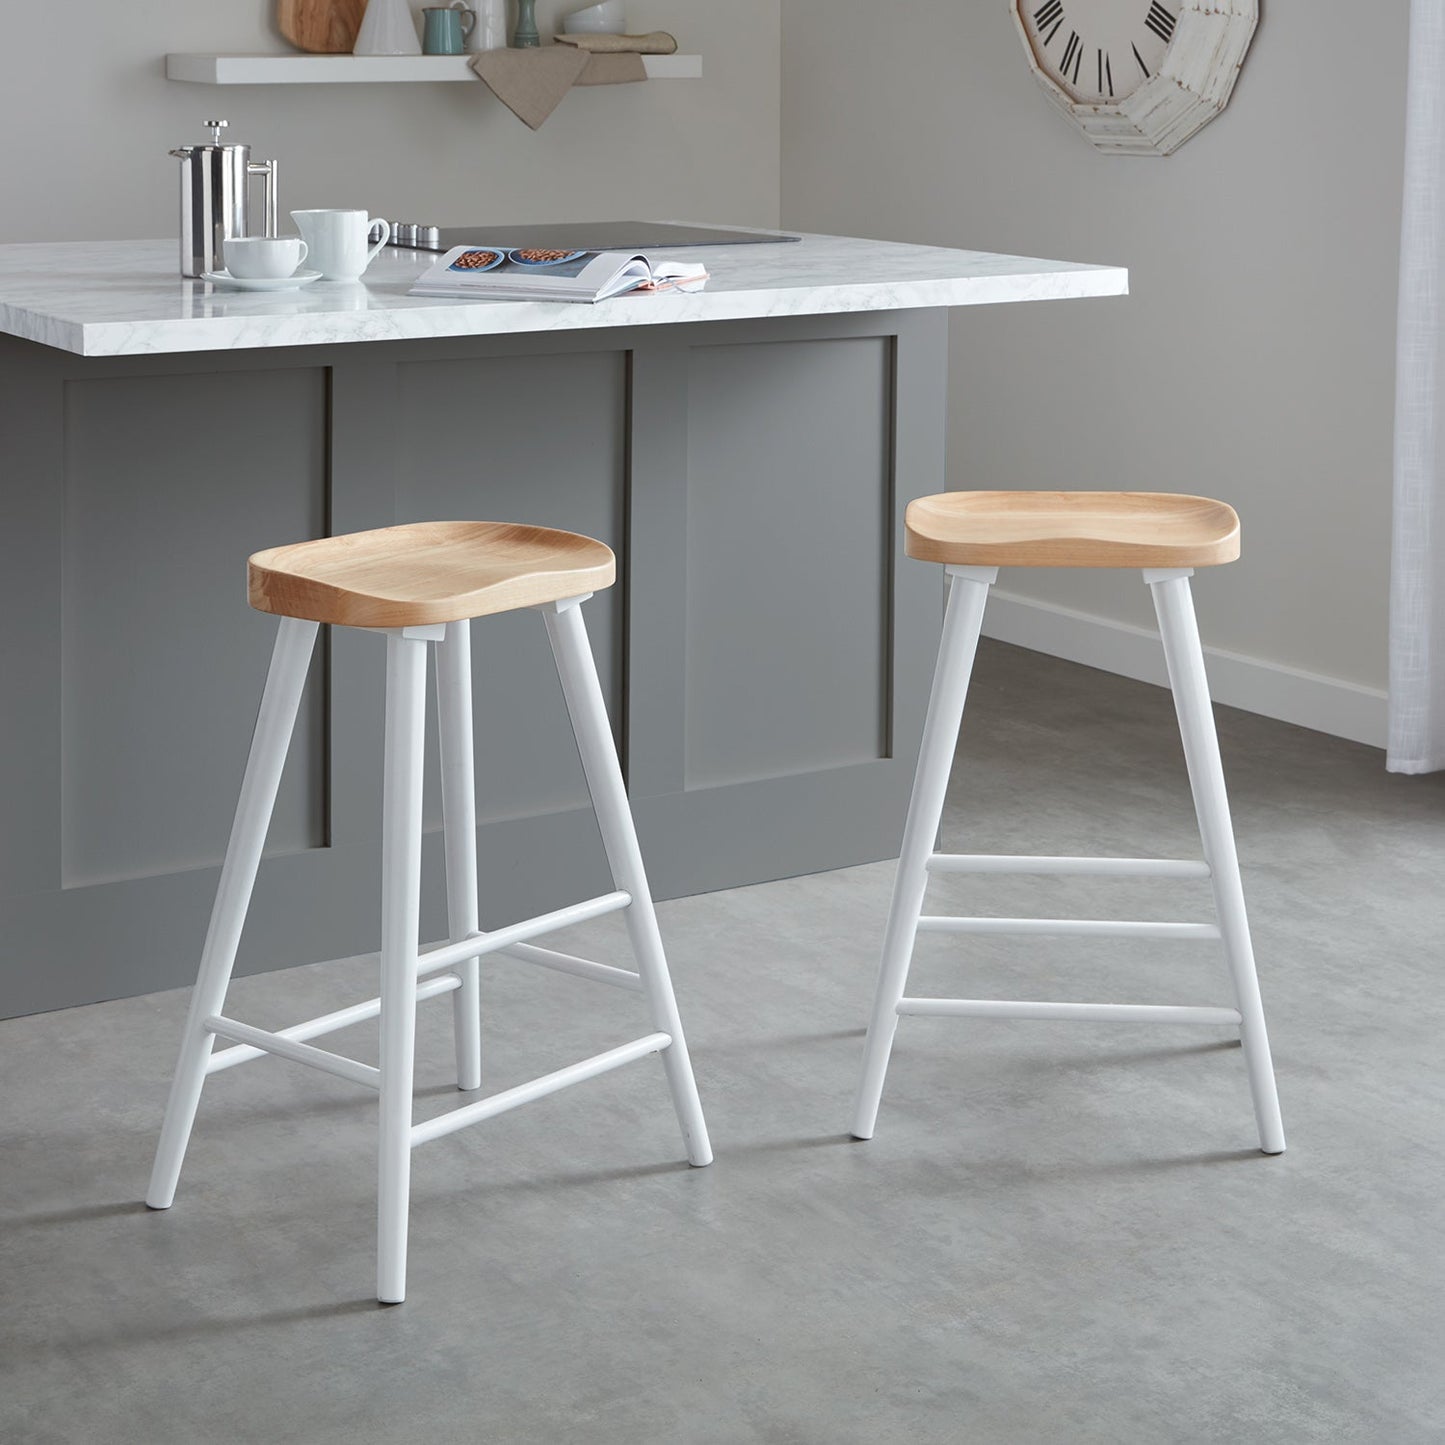 SIlvester bar stool - white frame with natural top - Laura James